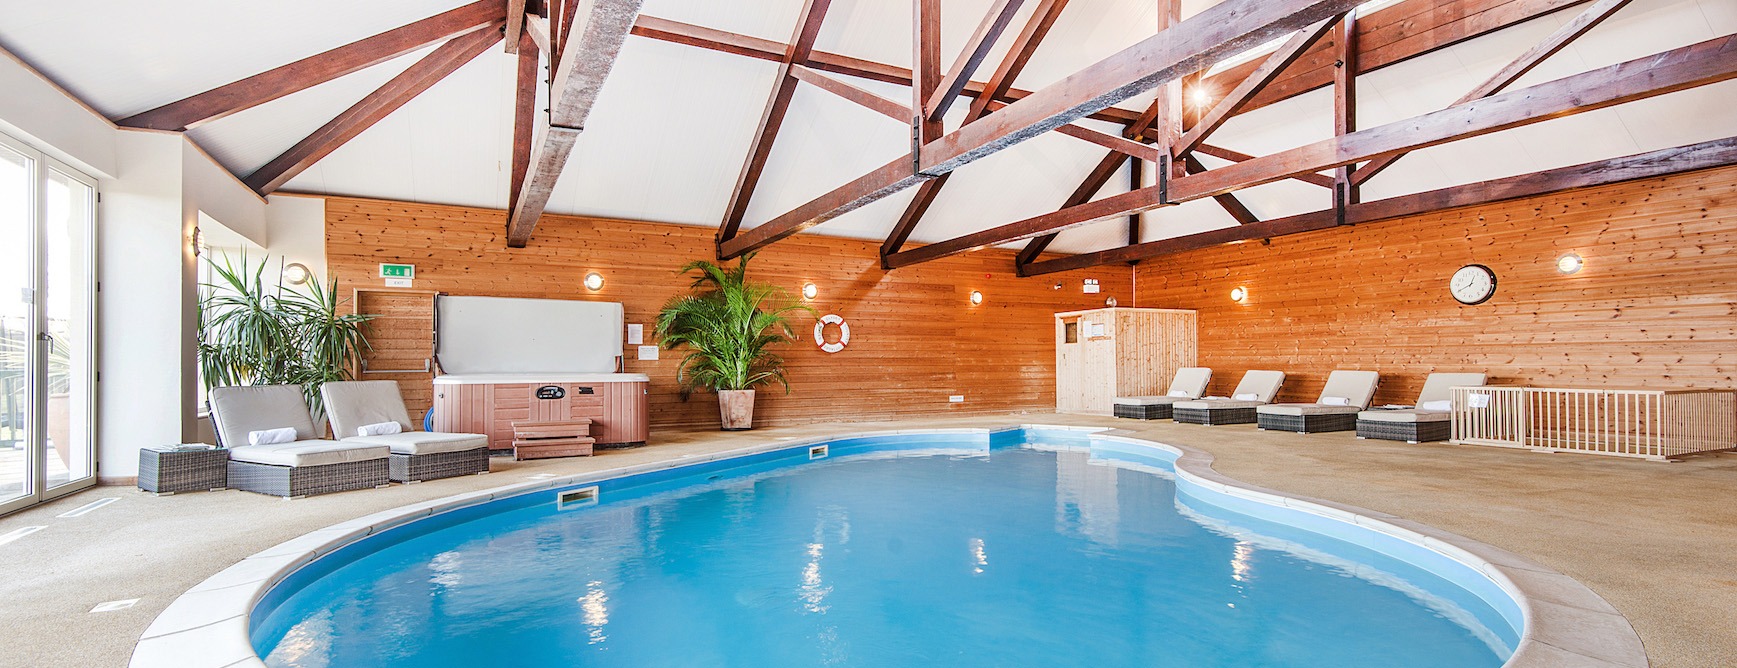 Indoor Heated Swimming Pool At Clydey Cottages